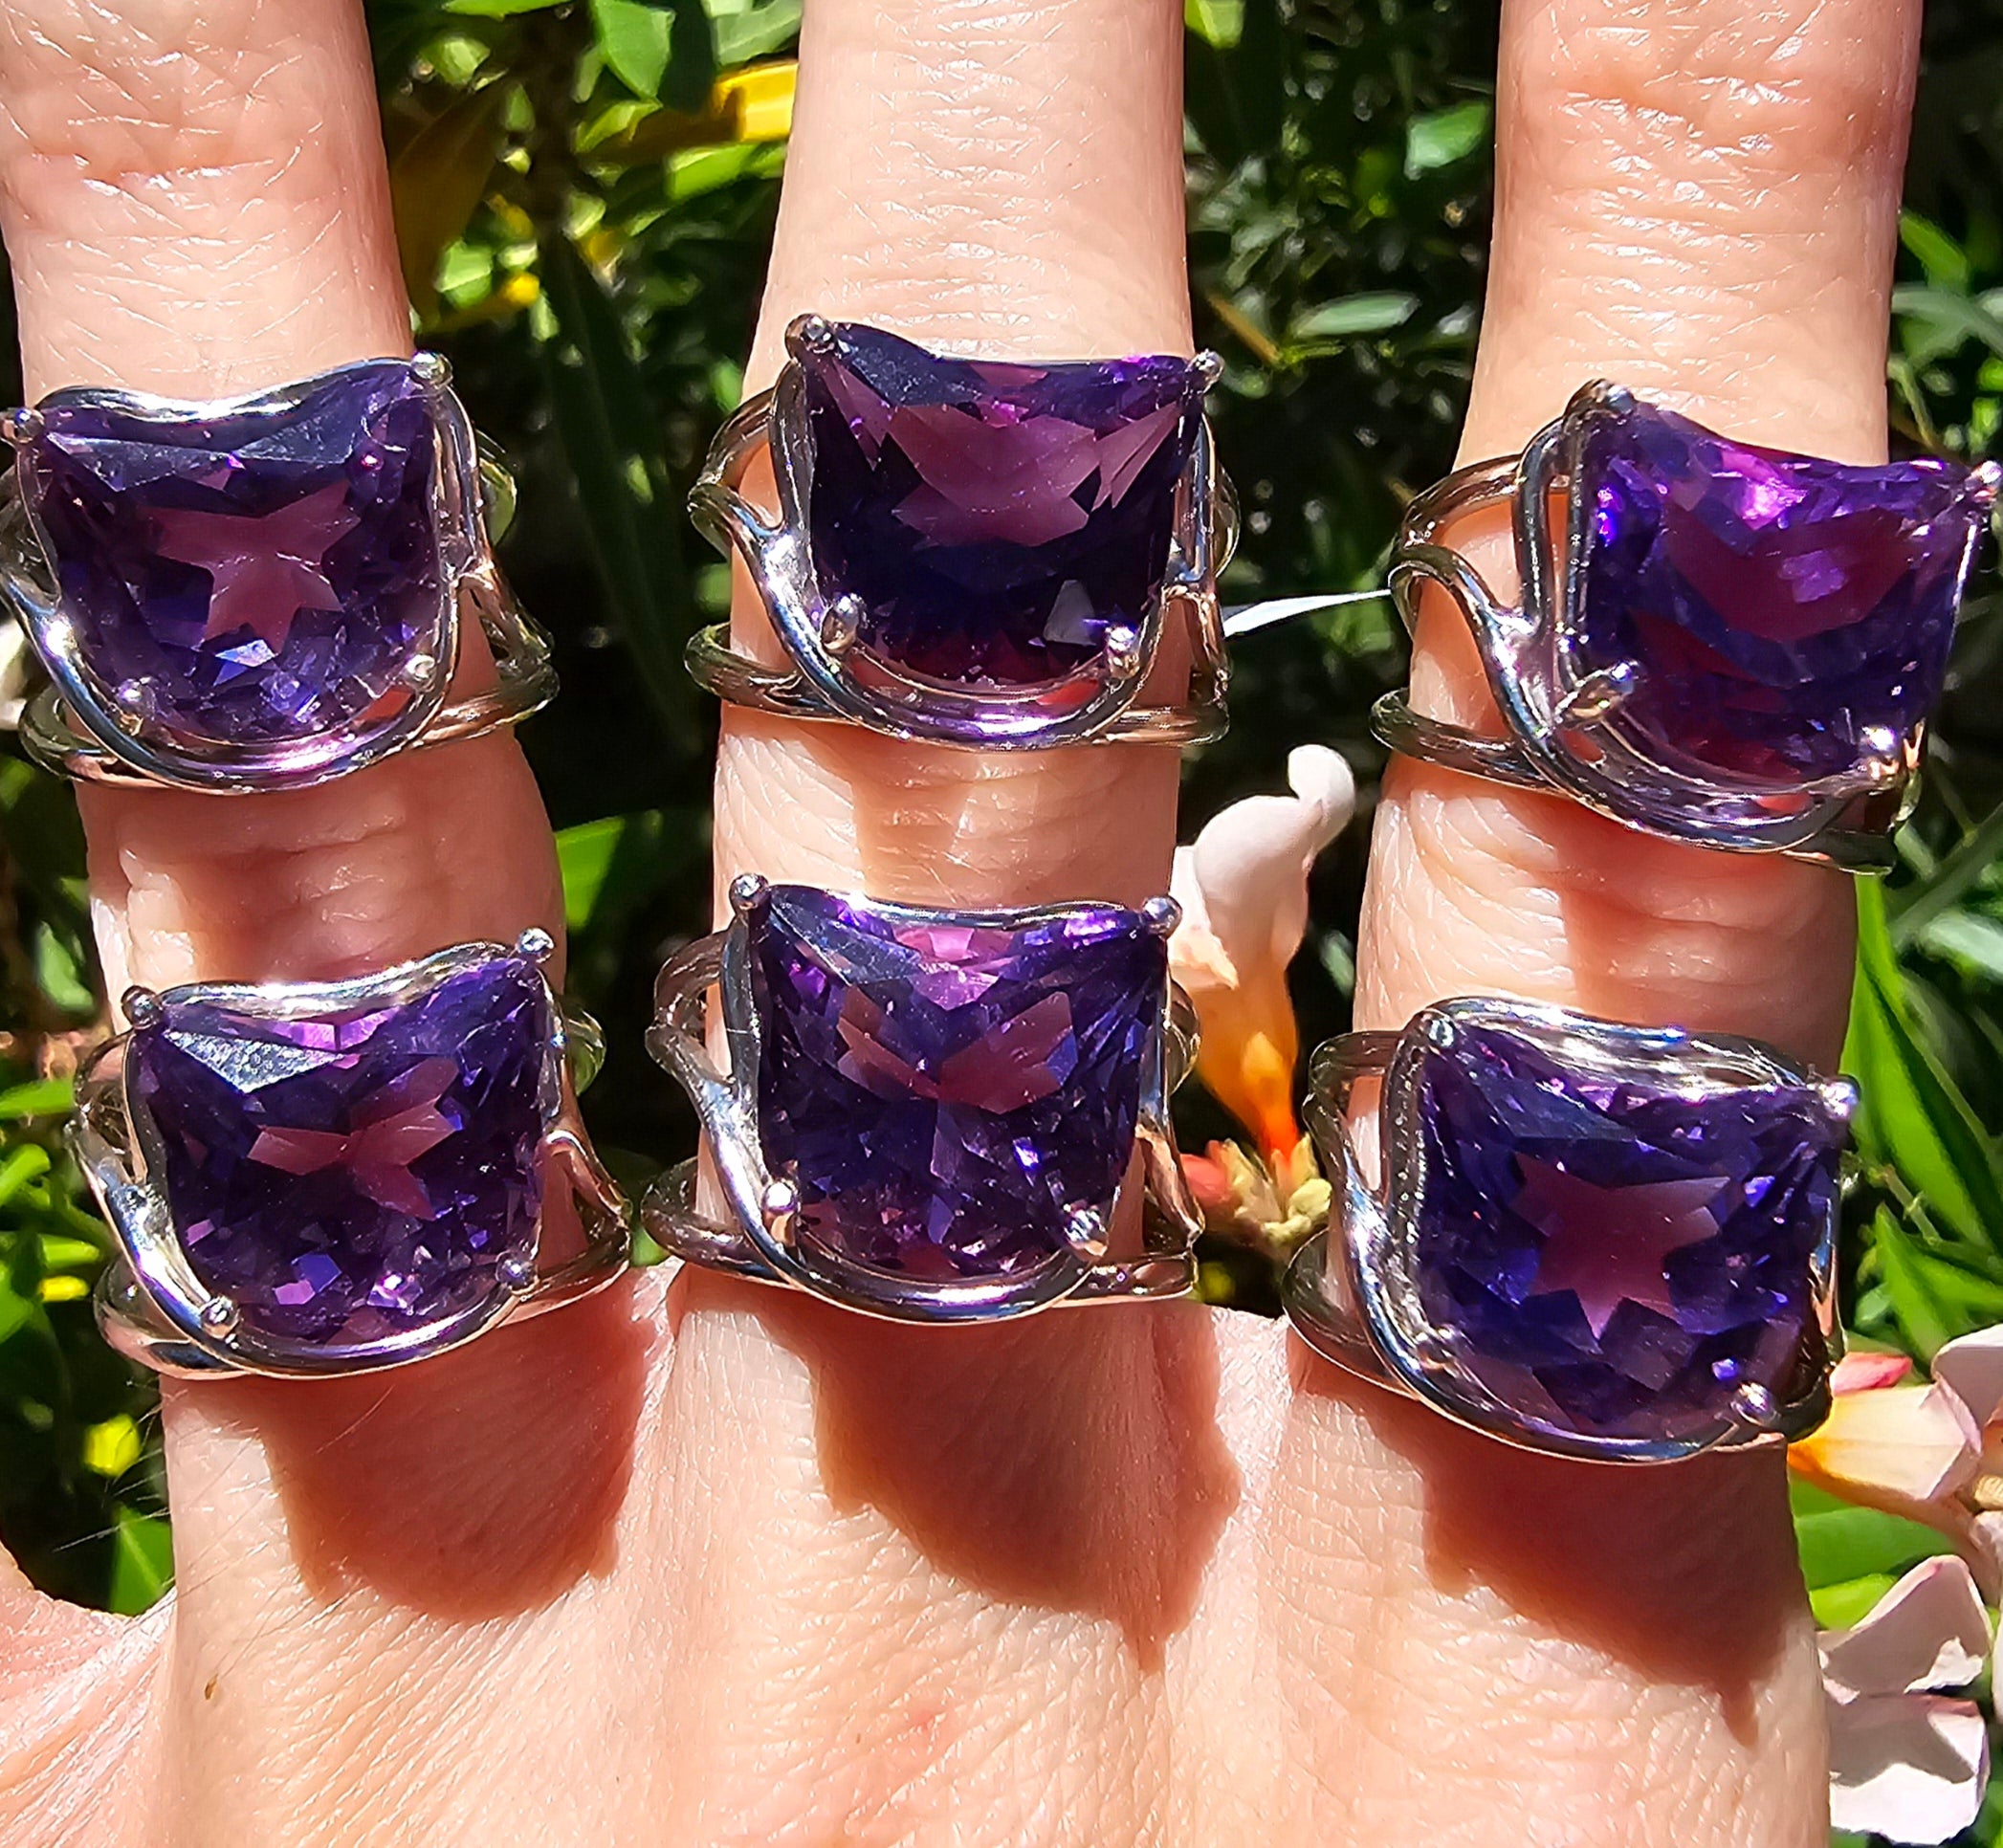 Amethyst Kitty Adjustable Finger Cuff Ring .925 Silver for Intuition, Luck, Protection and Purification